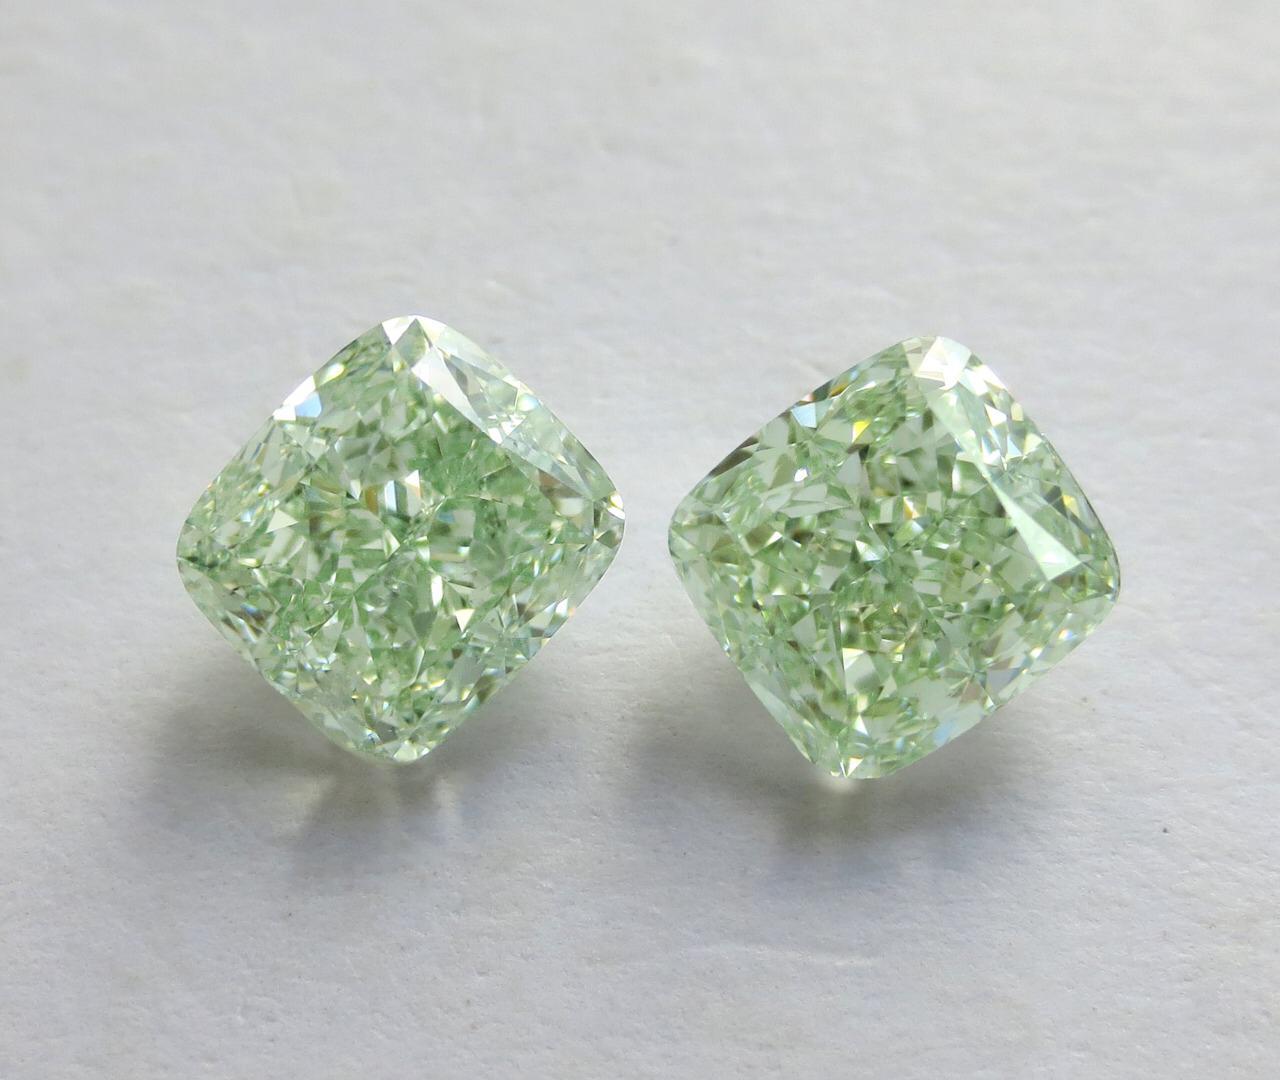 From the Emilio Jewelry Vault, Showcasing a stunning pair of Gia certified 4.00 Carat total weight natural Fancy yellowish green diamonds. This pair is very special because gia has given the overtone color “yellowish green” as opposed to “yellow